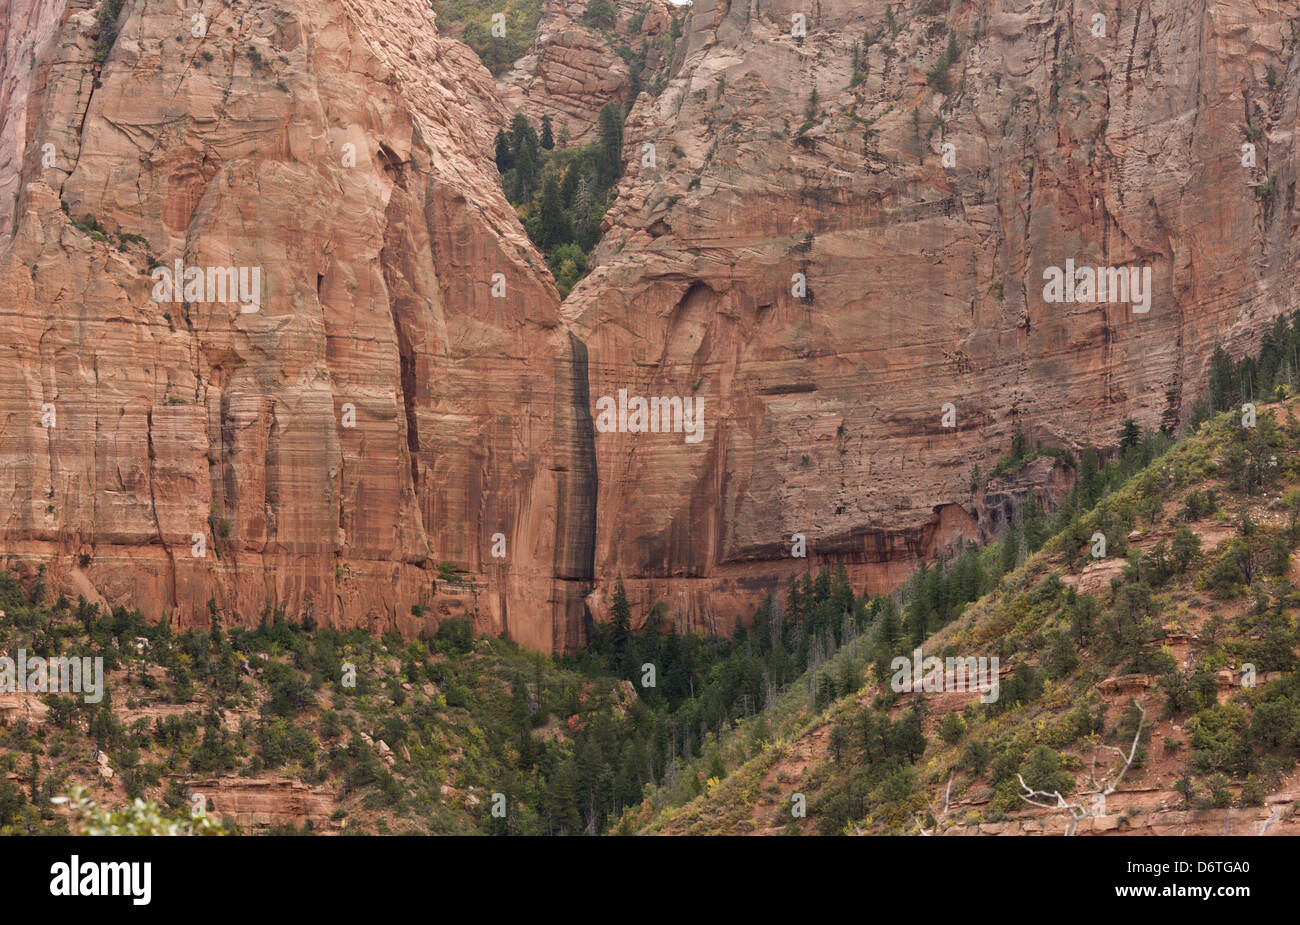 Hanging canyon, caused by fault uplift, in sandstone walls of canyon, Kolob Canyon, Zion N.P., Utah, U.S.A., October Stock Photo